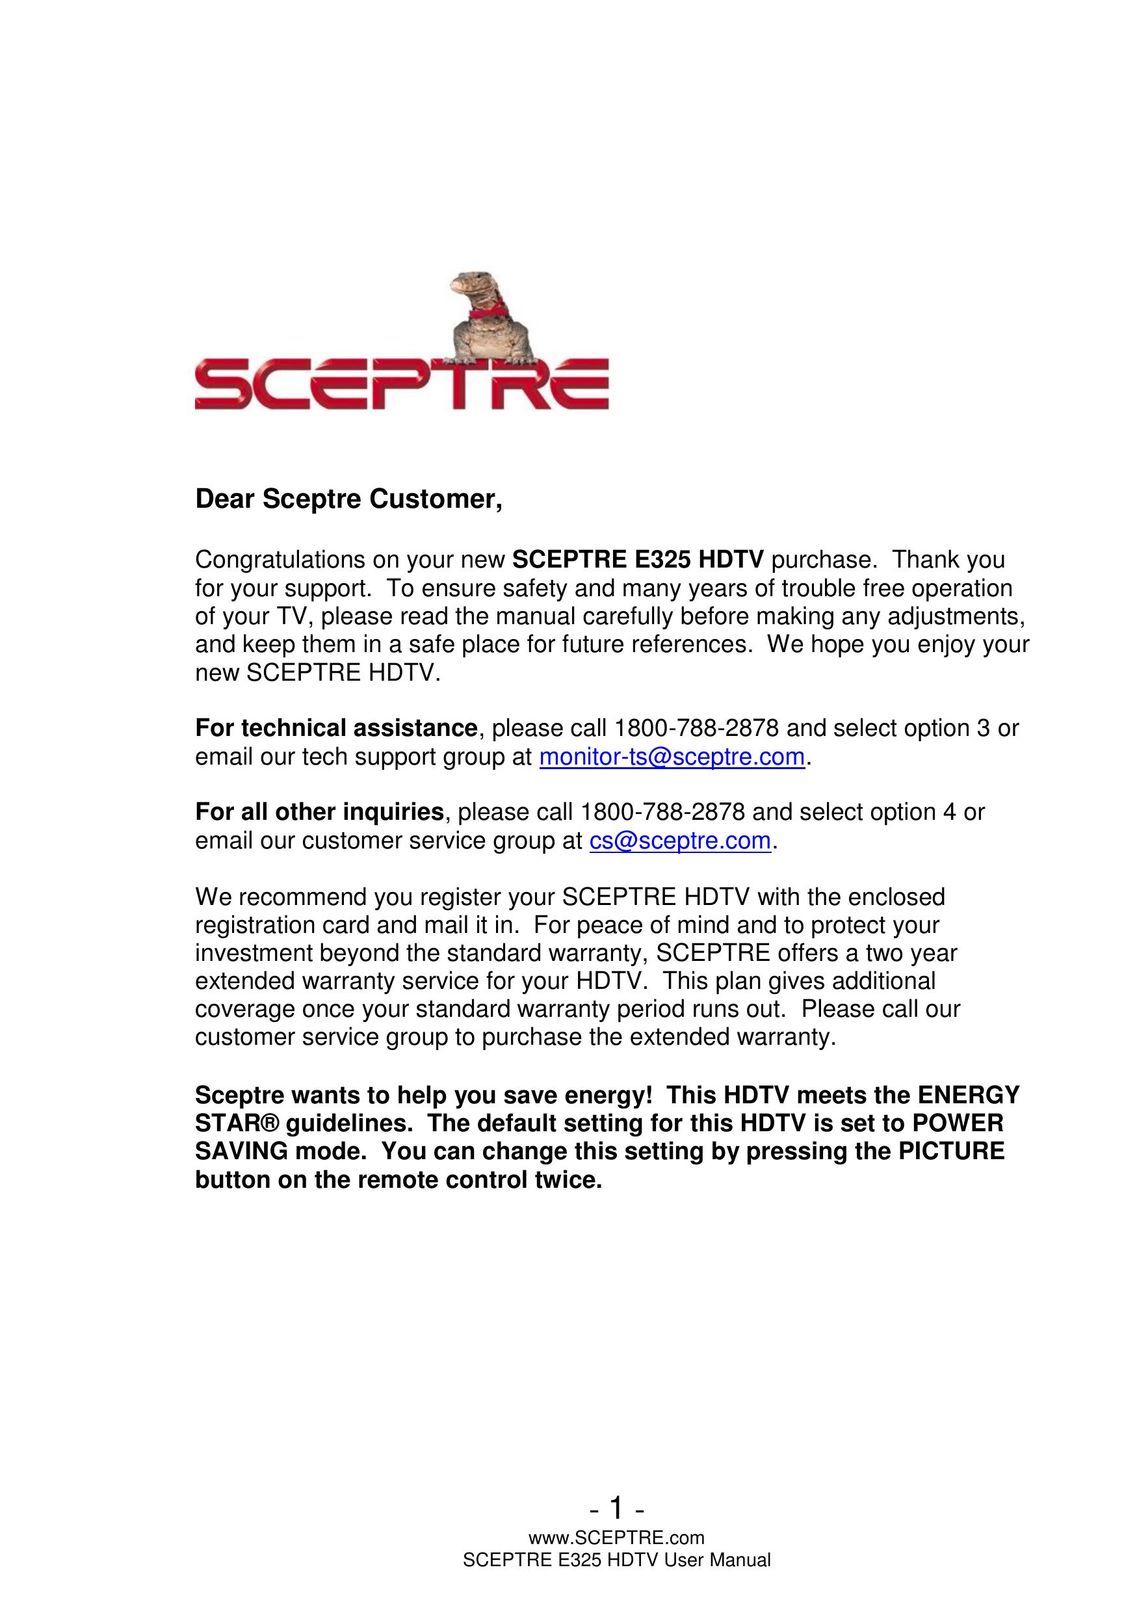 Sceptre Technologies E325 Flat Panel Television User Manual (Page 1)